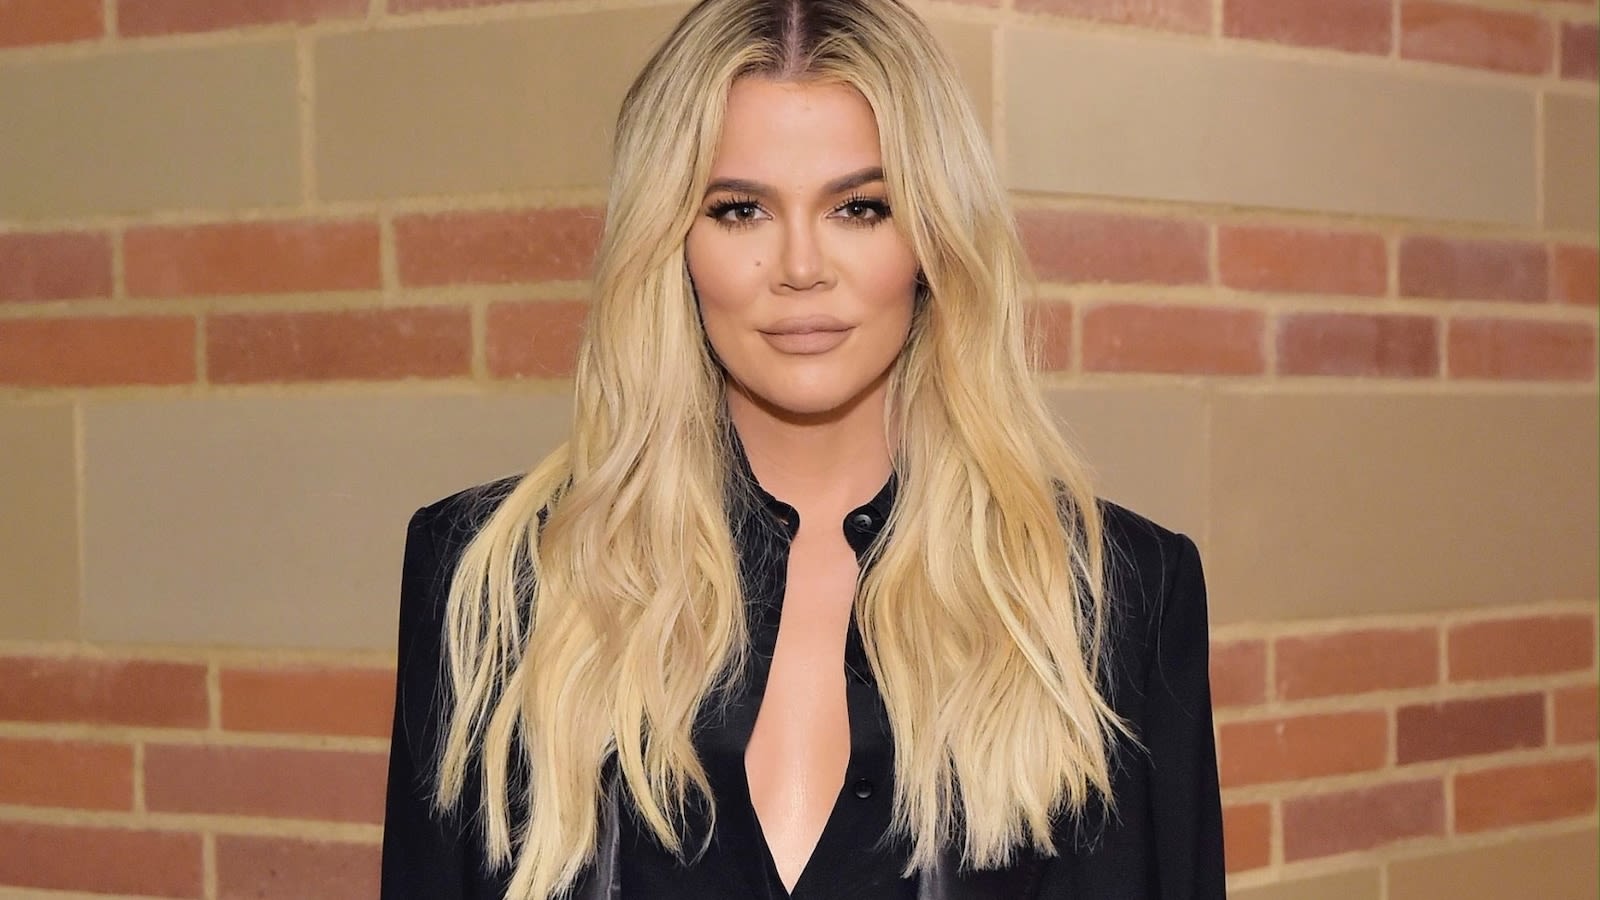 Khloé Kardashian says she was a 'major emotional eater': What to know about the behavior